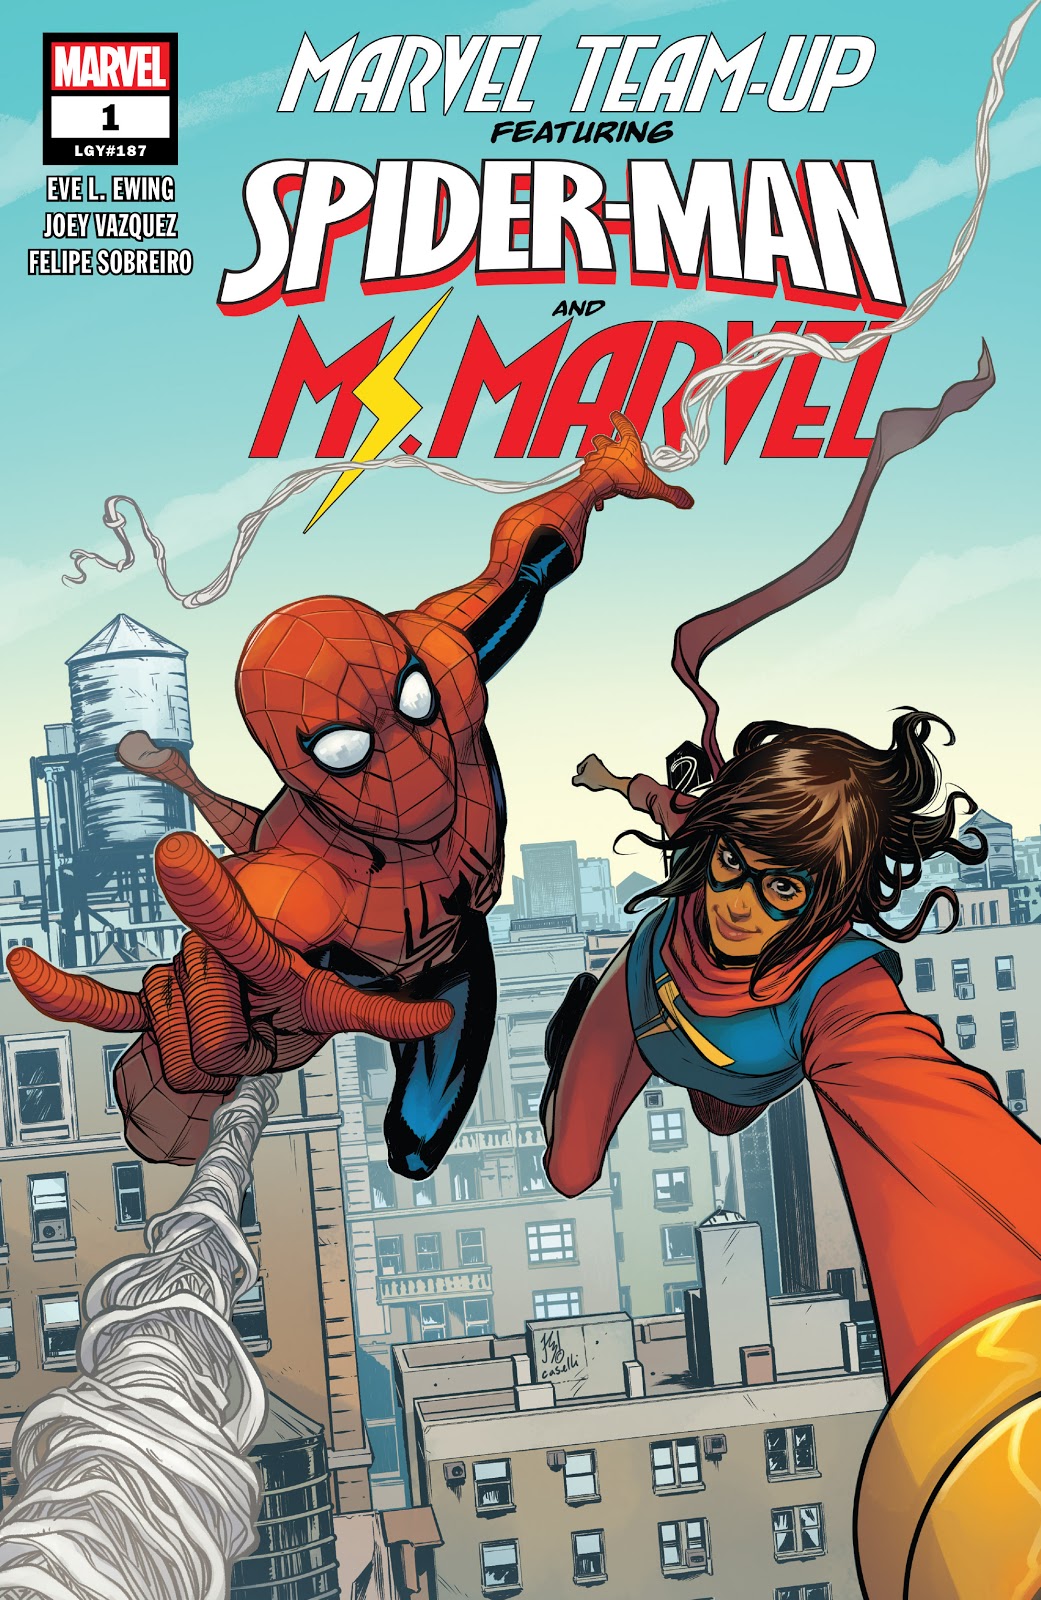 Marvel Team Up #1 Review